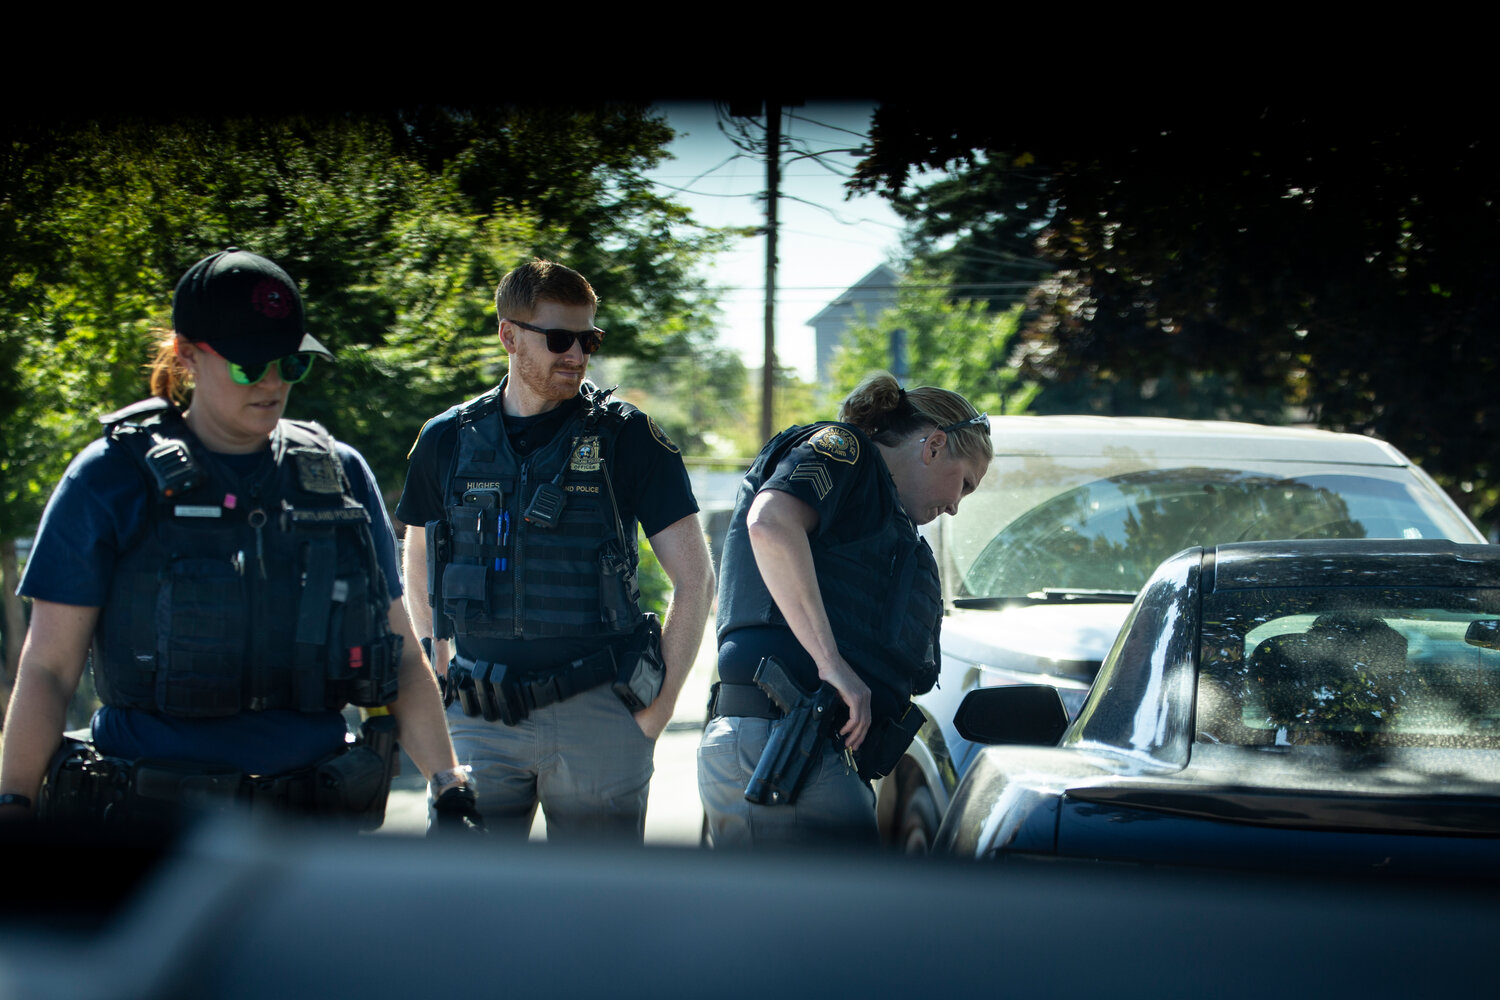 Members of the Portland Police Bureau’s Human Trafficking Unit interrupt a “car date” during a directed patrol mission in Northeast Portland in July. (Moriah Ratner/InvestigateWest)